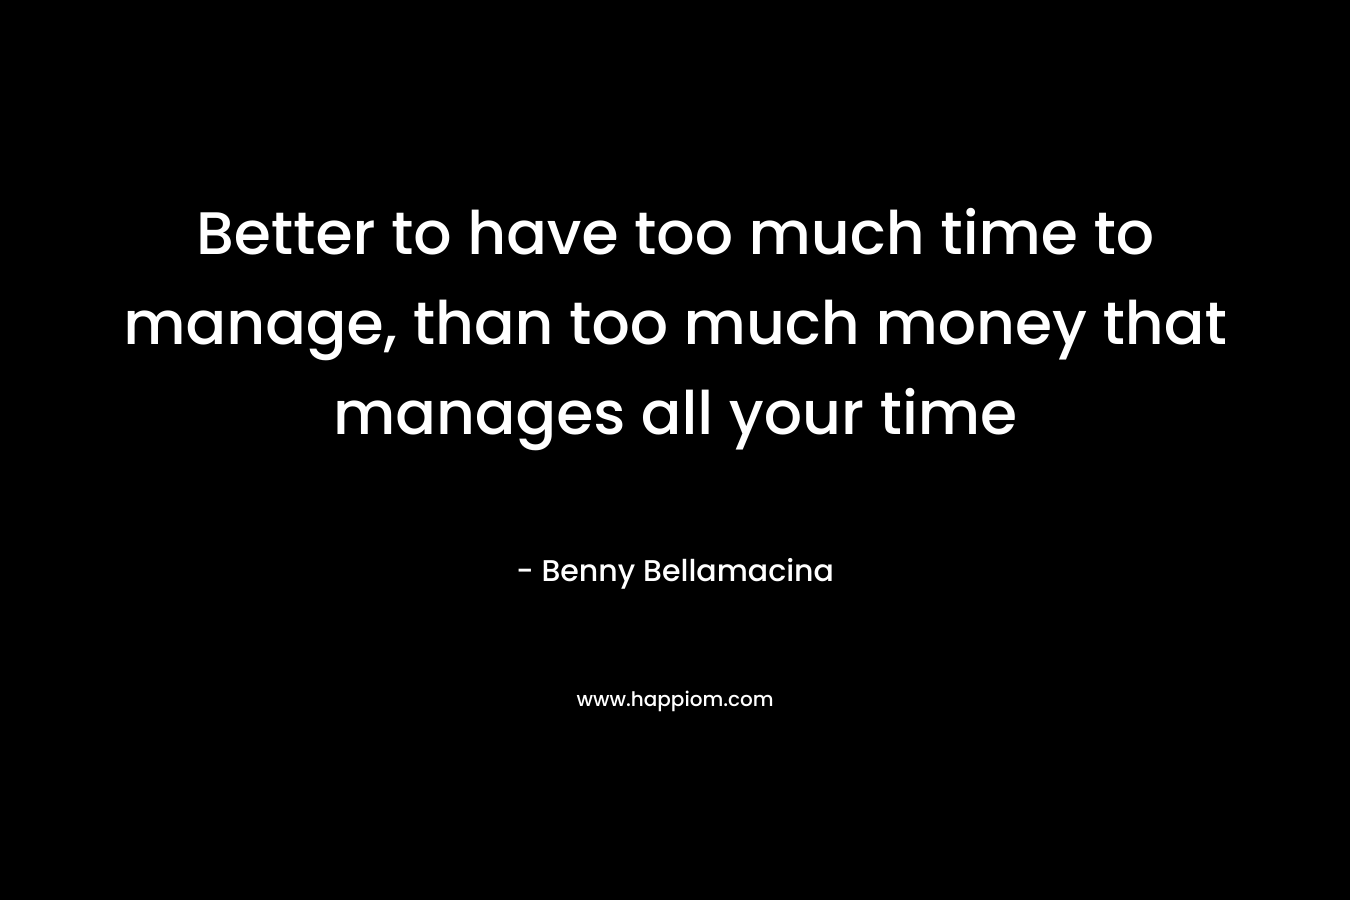 Better to have too much time to manage, than too much money that manages all your time